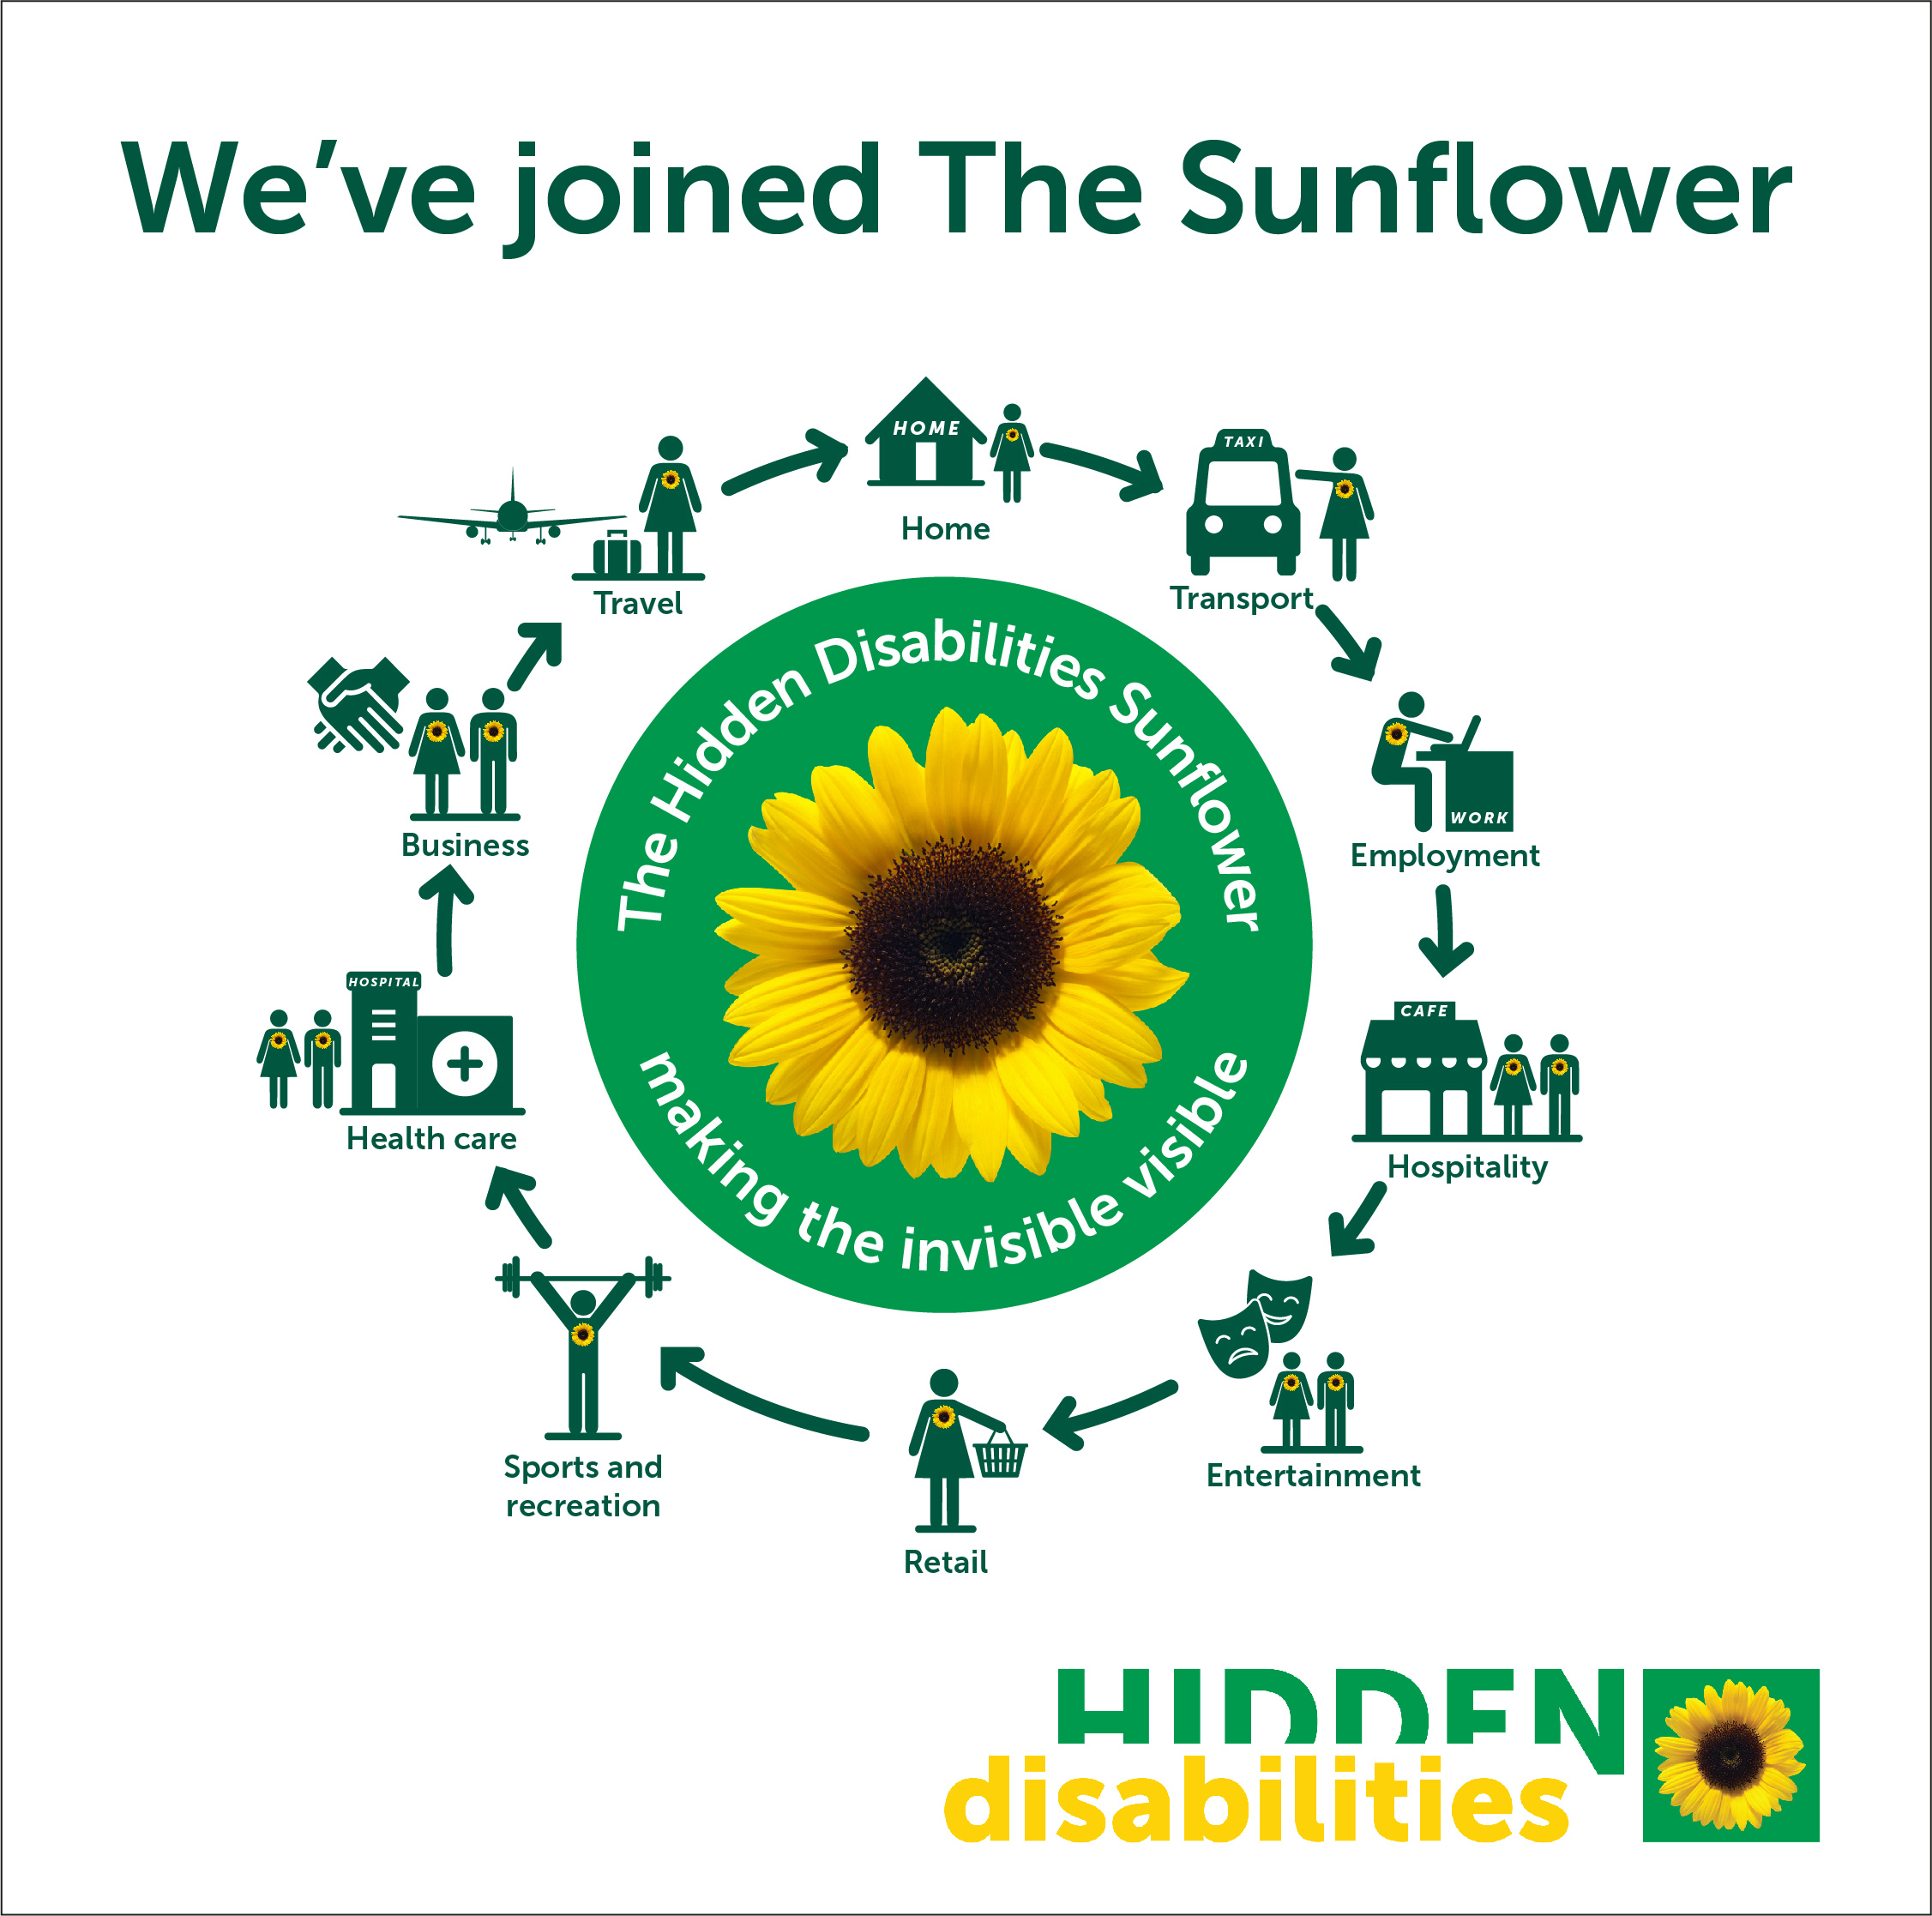 Image is a web tile with a white background and dark green heading showing the text “We’ve Joined the Sunflower”. In the centre of the image there is a photo of a sunflower on a green circle. Written in a circle around the sunflower in white lettering is the message “The Hidden Disabilities Sunflower making the invisible visible”. Displayed in a circle around the central image are icons and text showing the following categories: home, transport, employment, hospitality, entertainment, retail, sports and recreation, health care, business and travel. The Hidden Disabilities Sunflower logo appears in the bottom right-hand corner of the image.